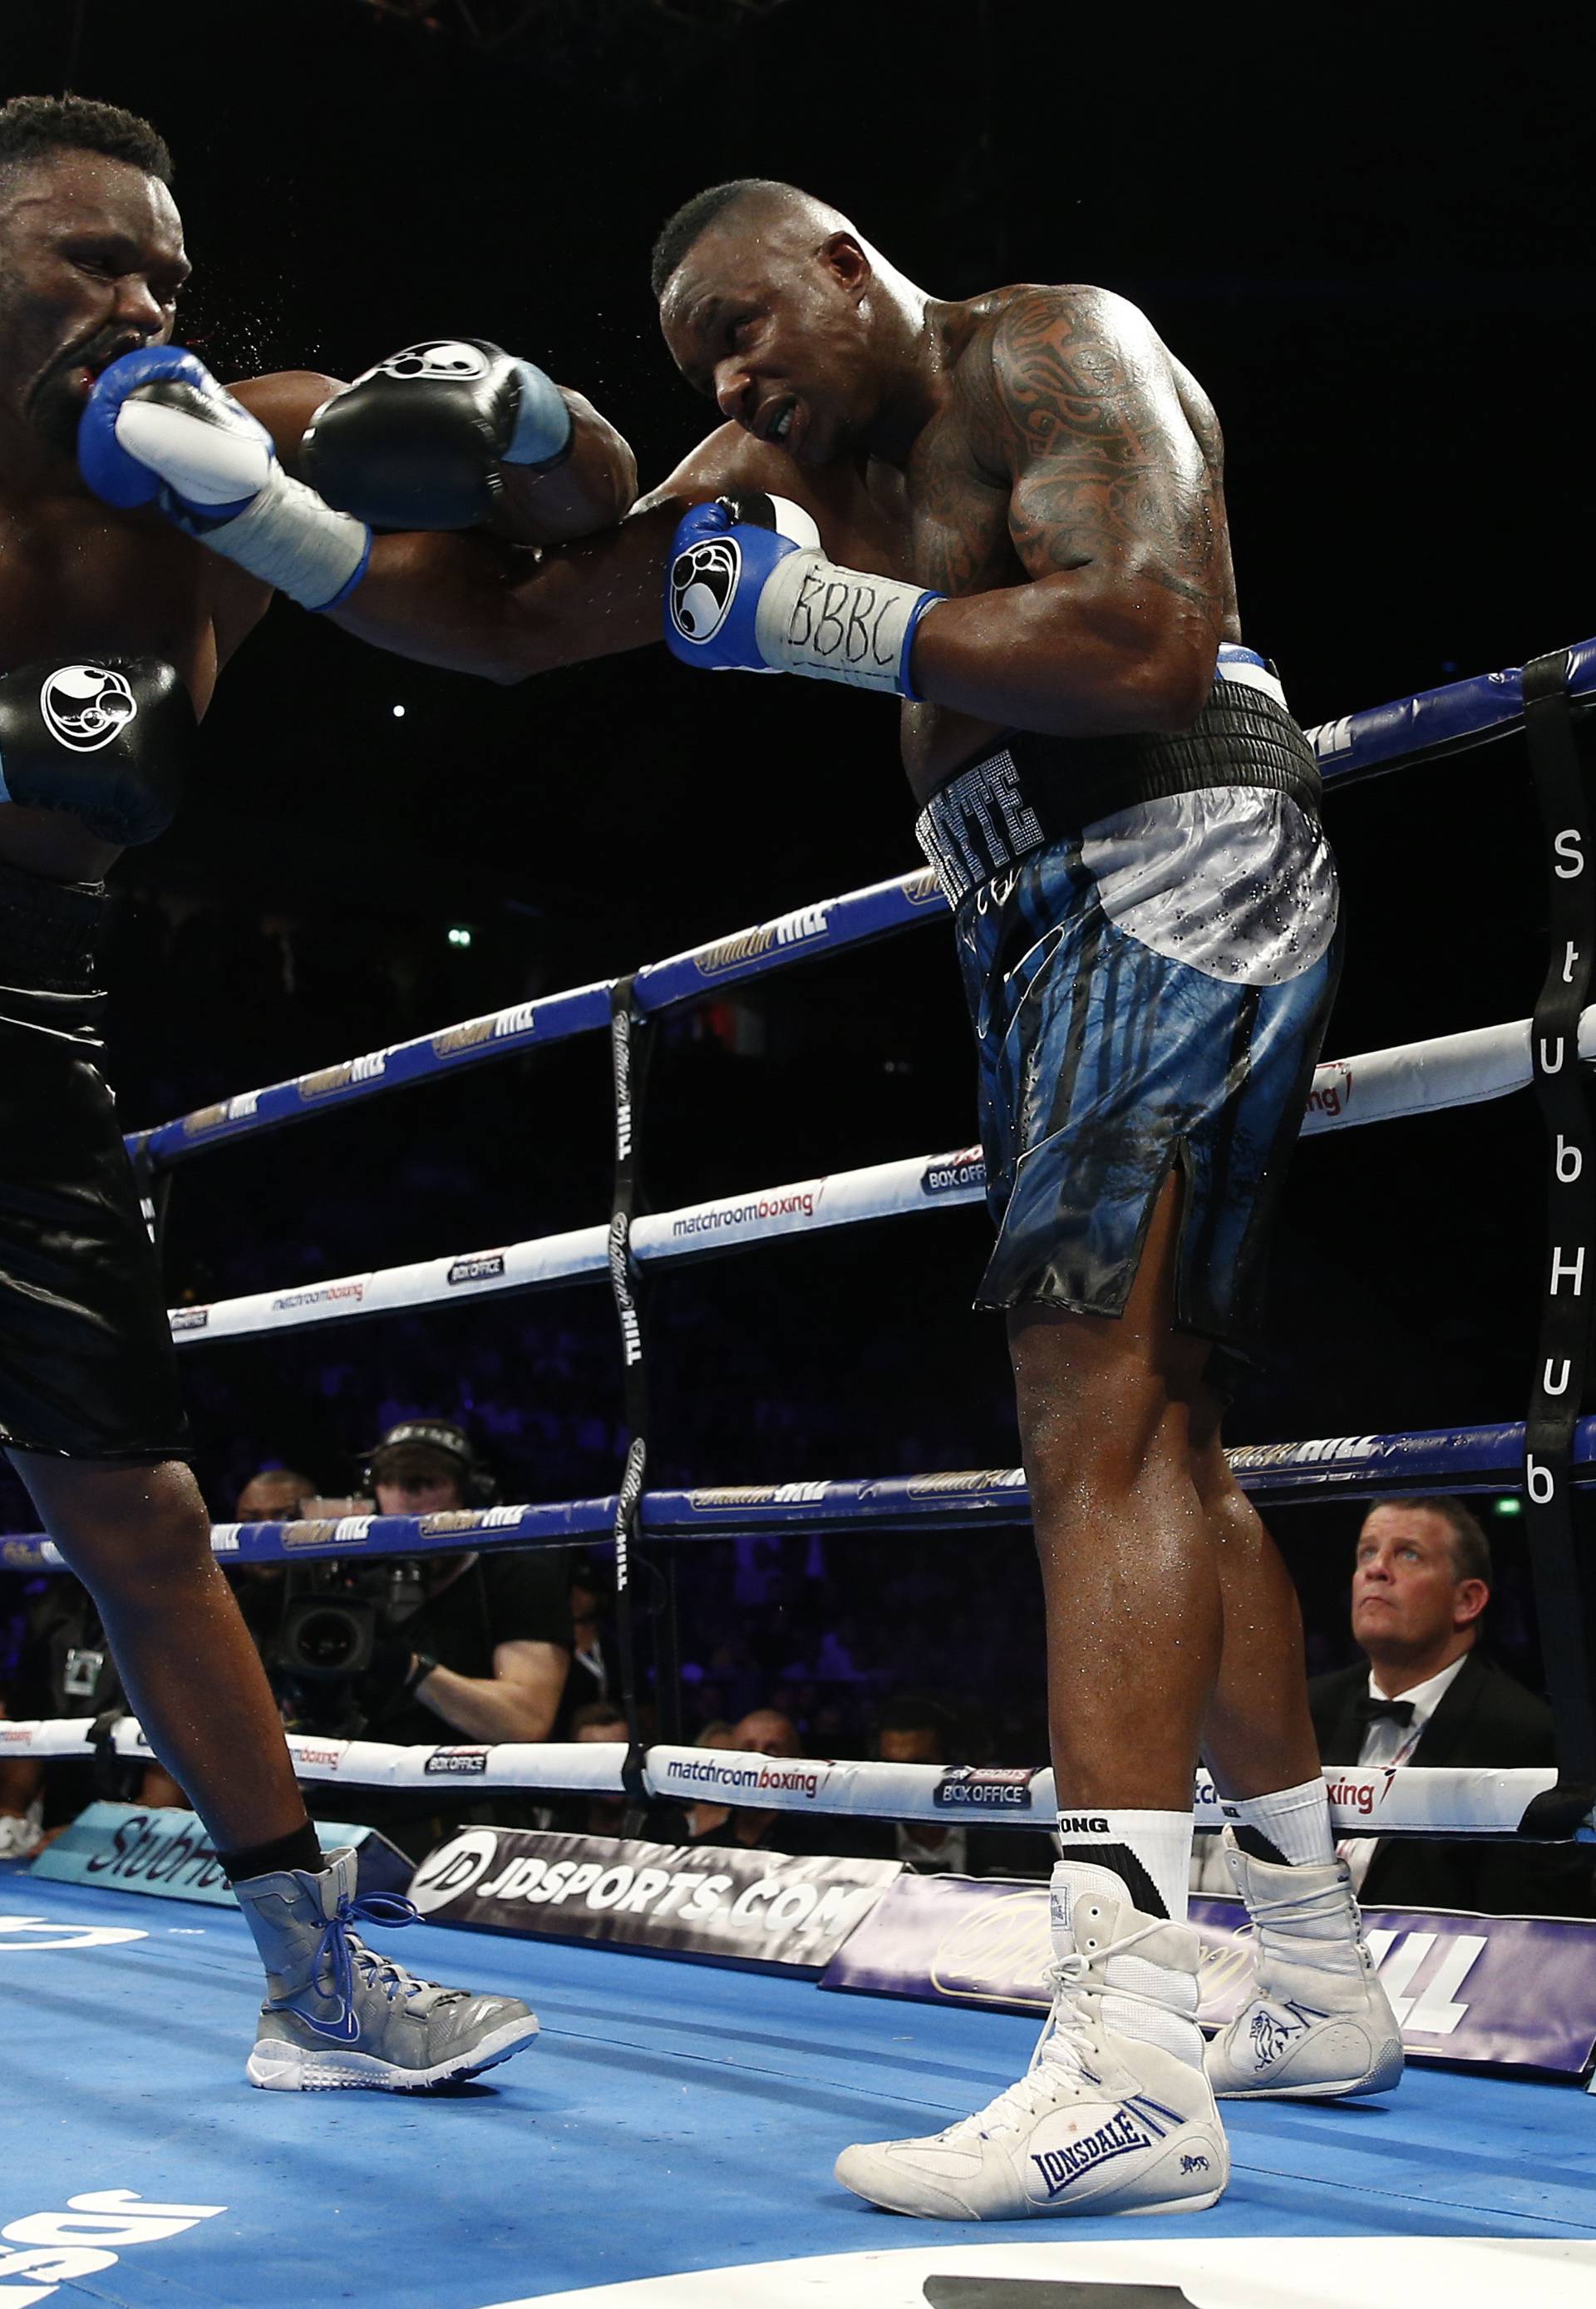 Dillian Whyte (R) in action against Dereck Chisora